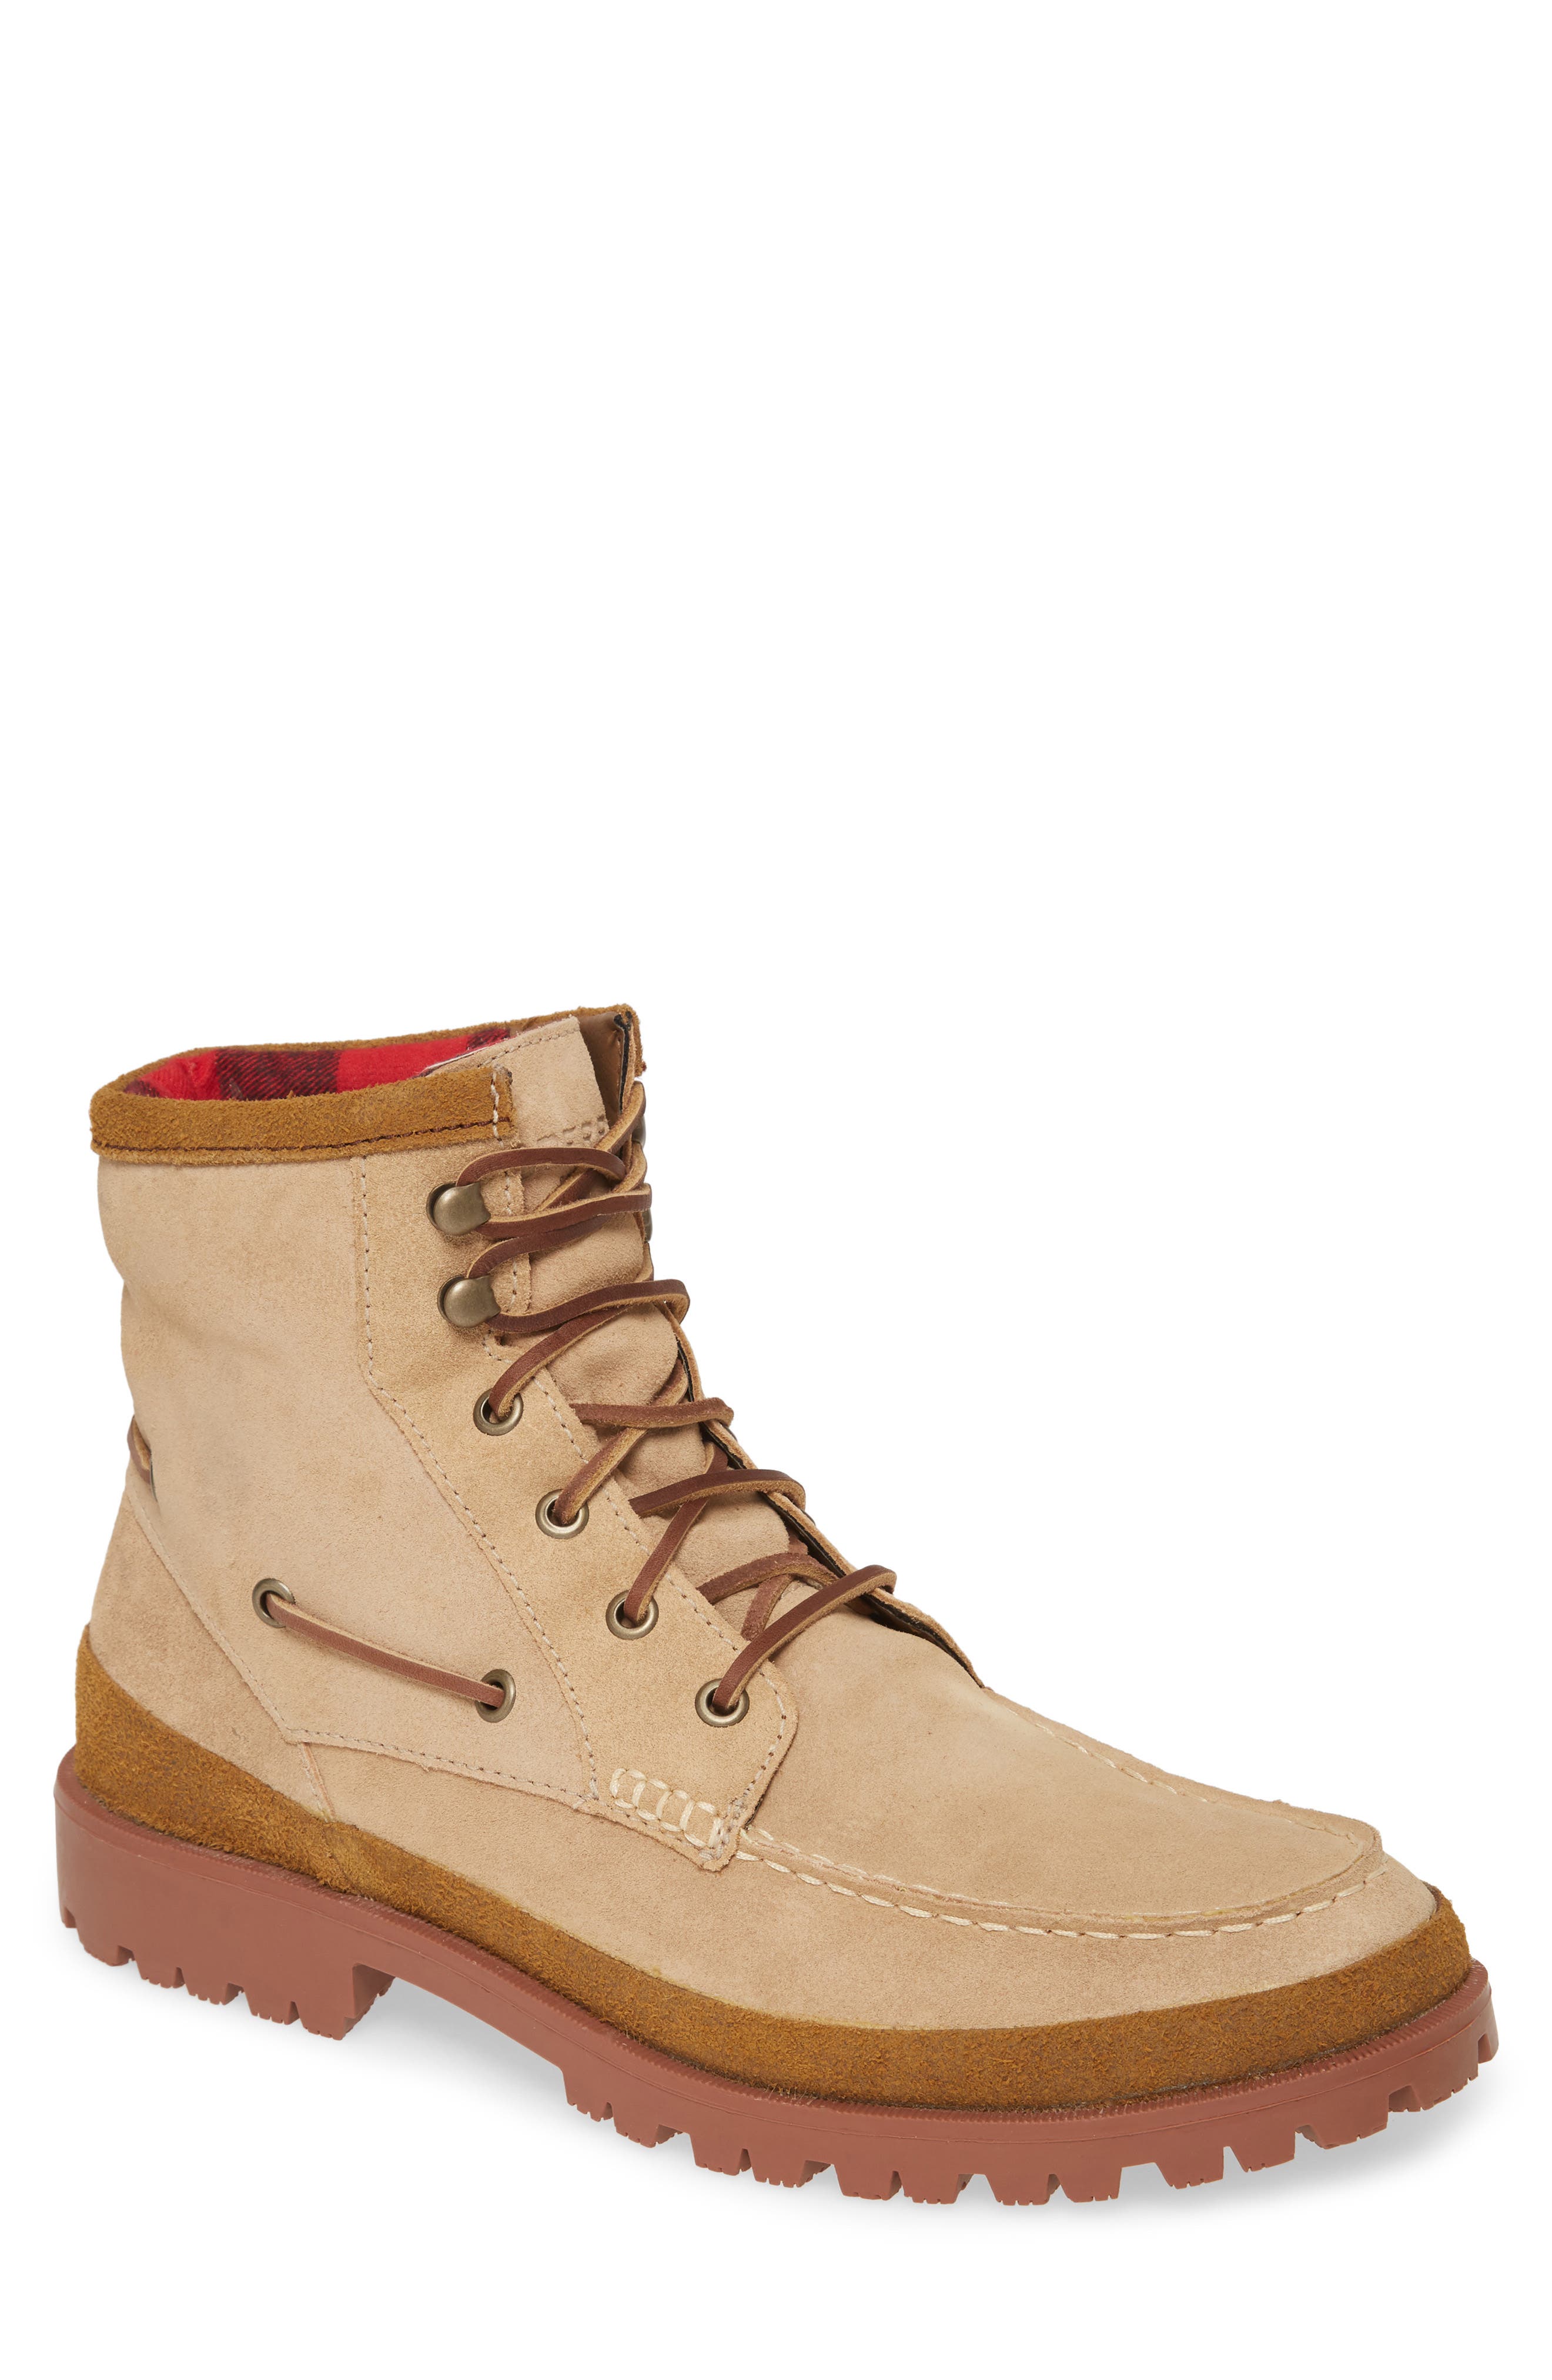 sperry moc toe boot